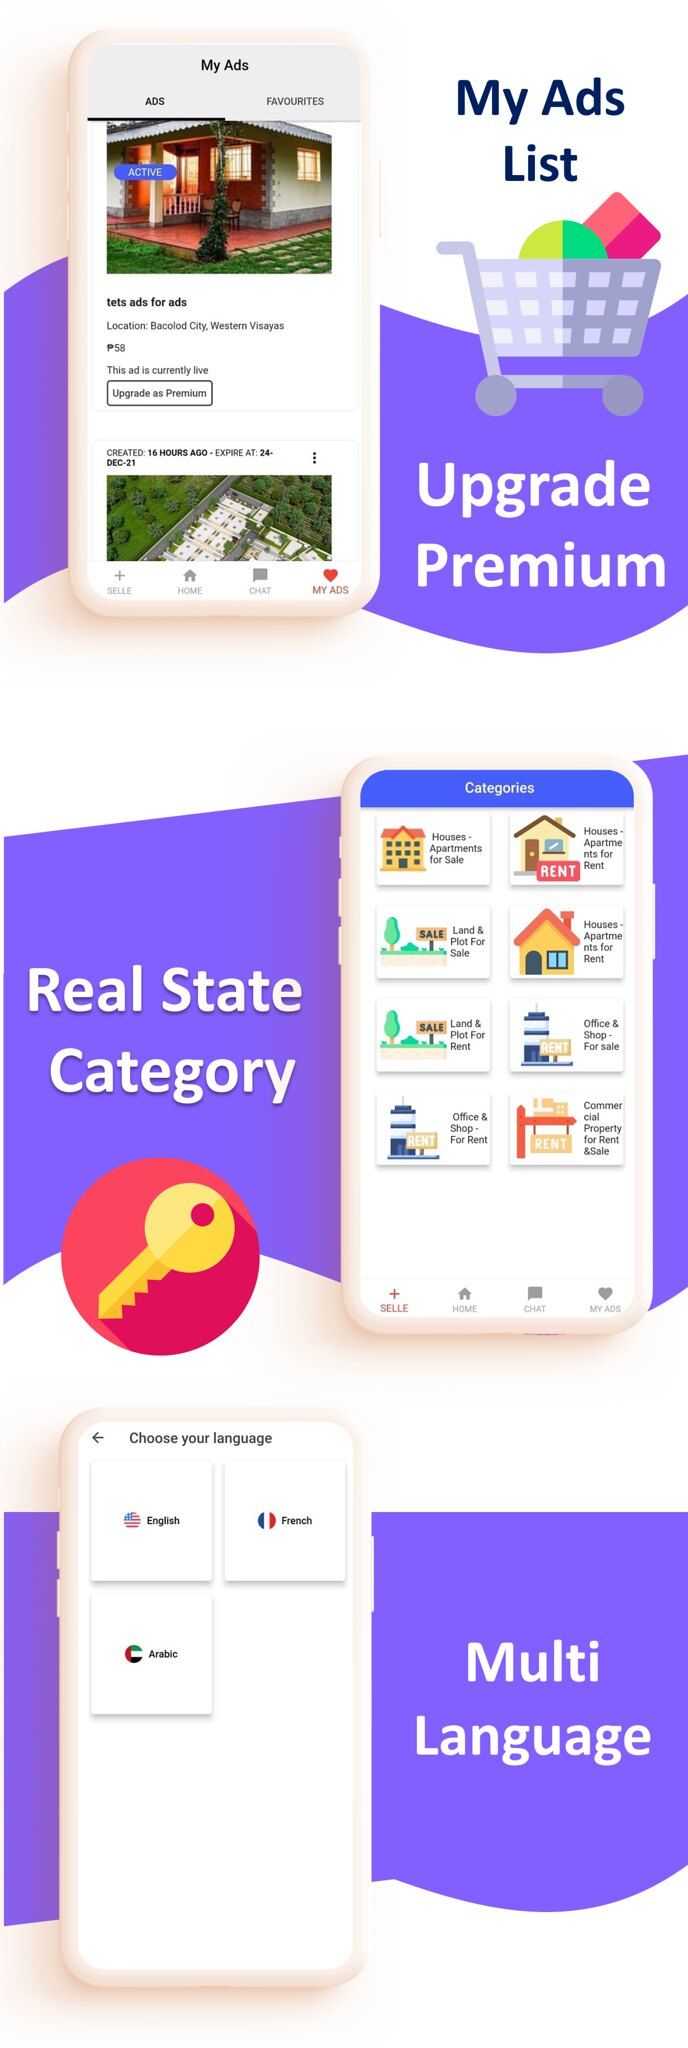 eReal State APP | Buy & Sell Real State Properties | Live Chat | Multi Login | Multi Payment Gateway - 6